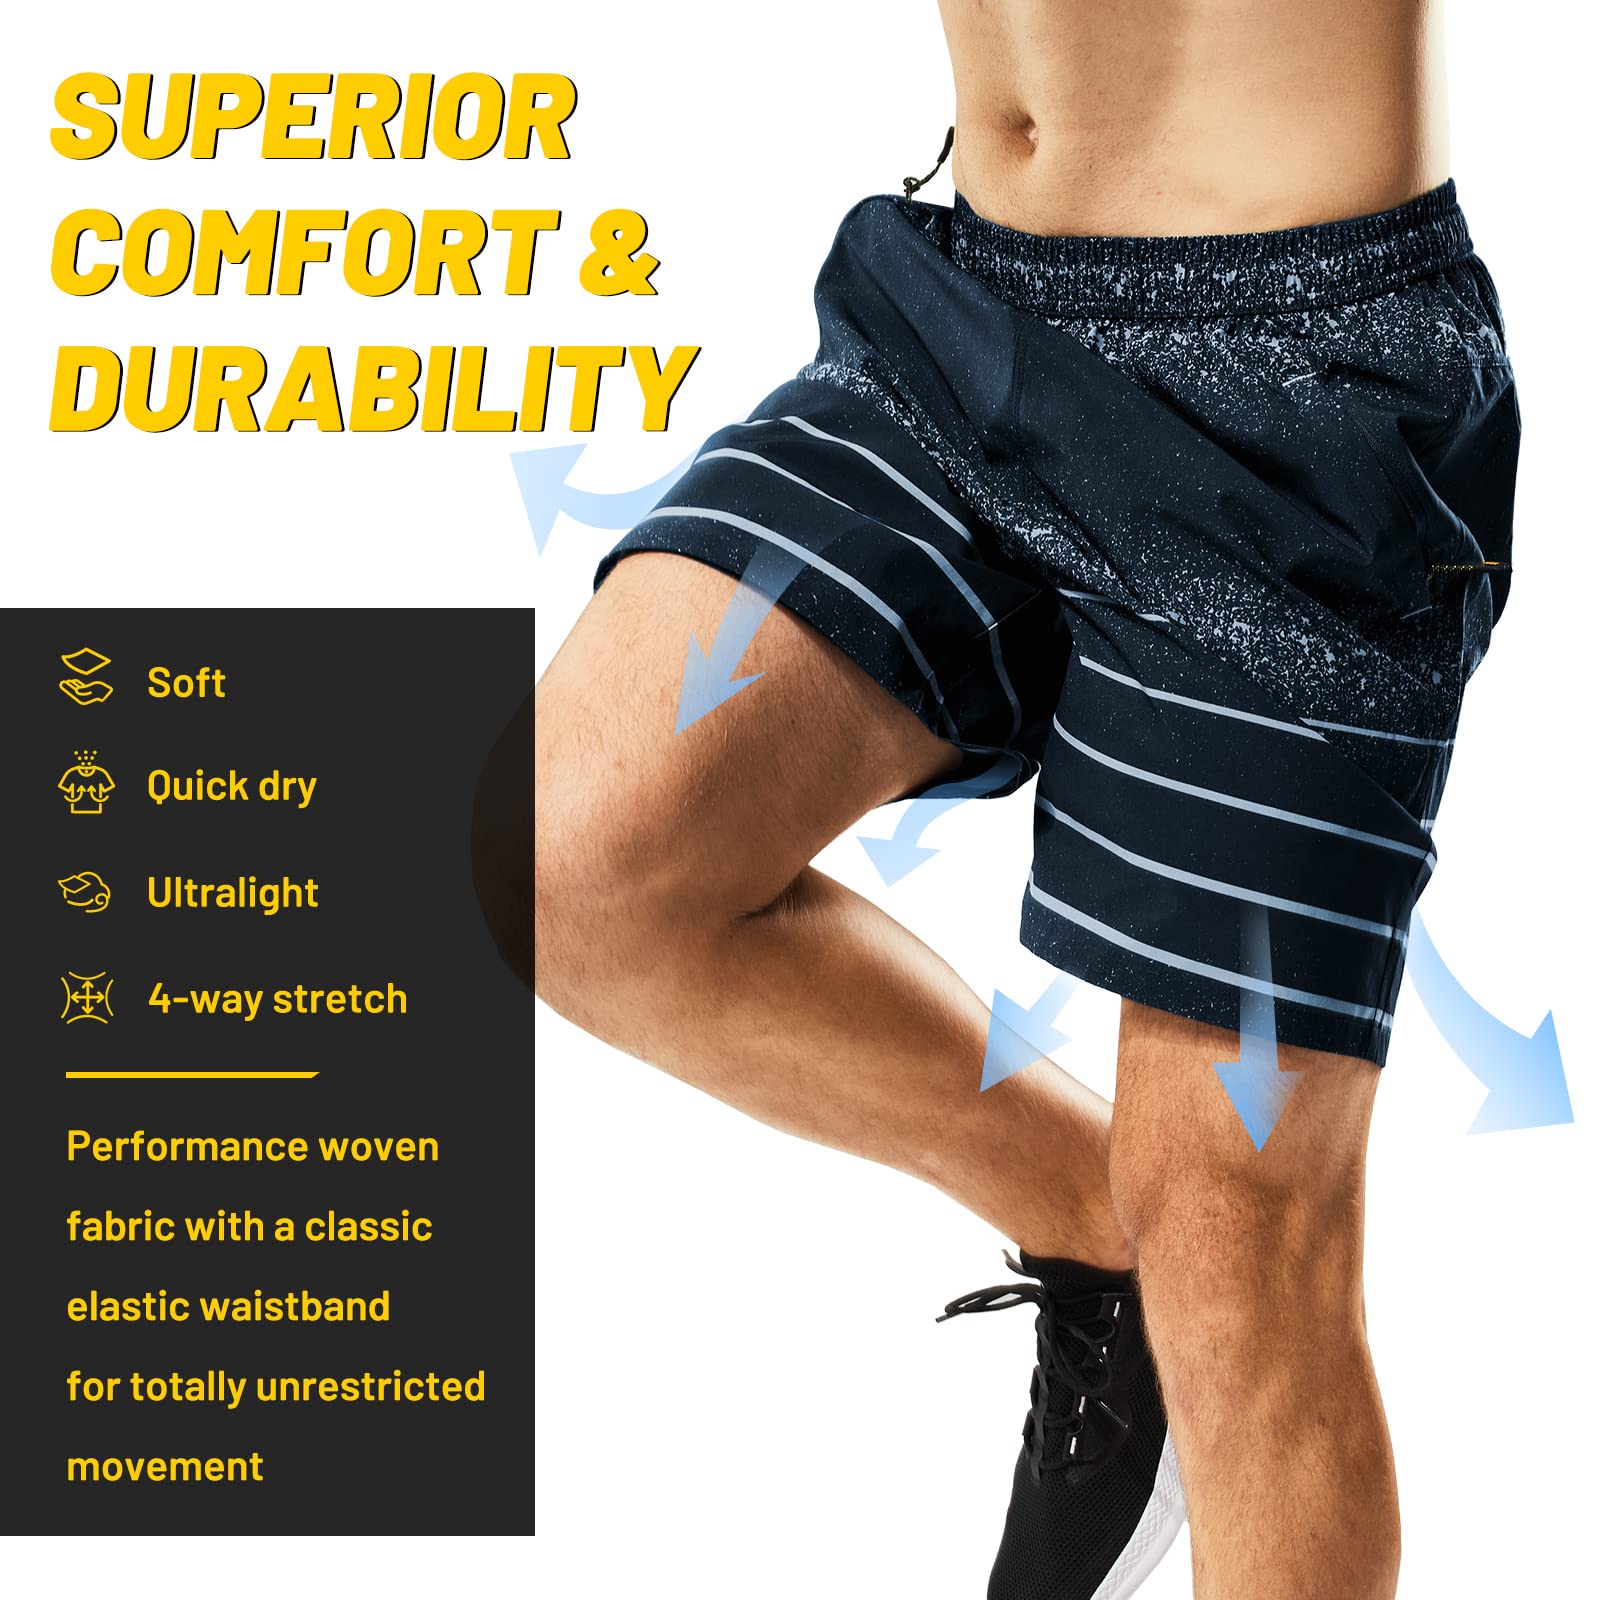 Men's Dry Fit Athletic Gym Shorts with Zipper Pockets 7 inch Men's Shorts MIER